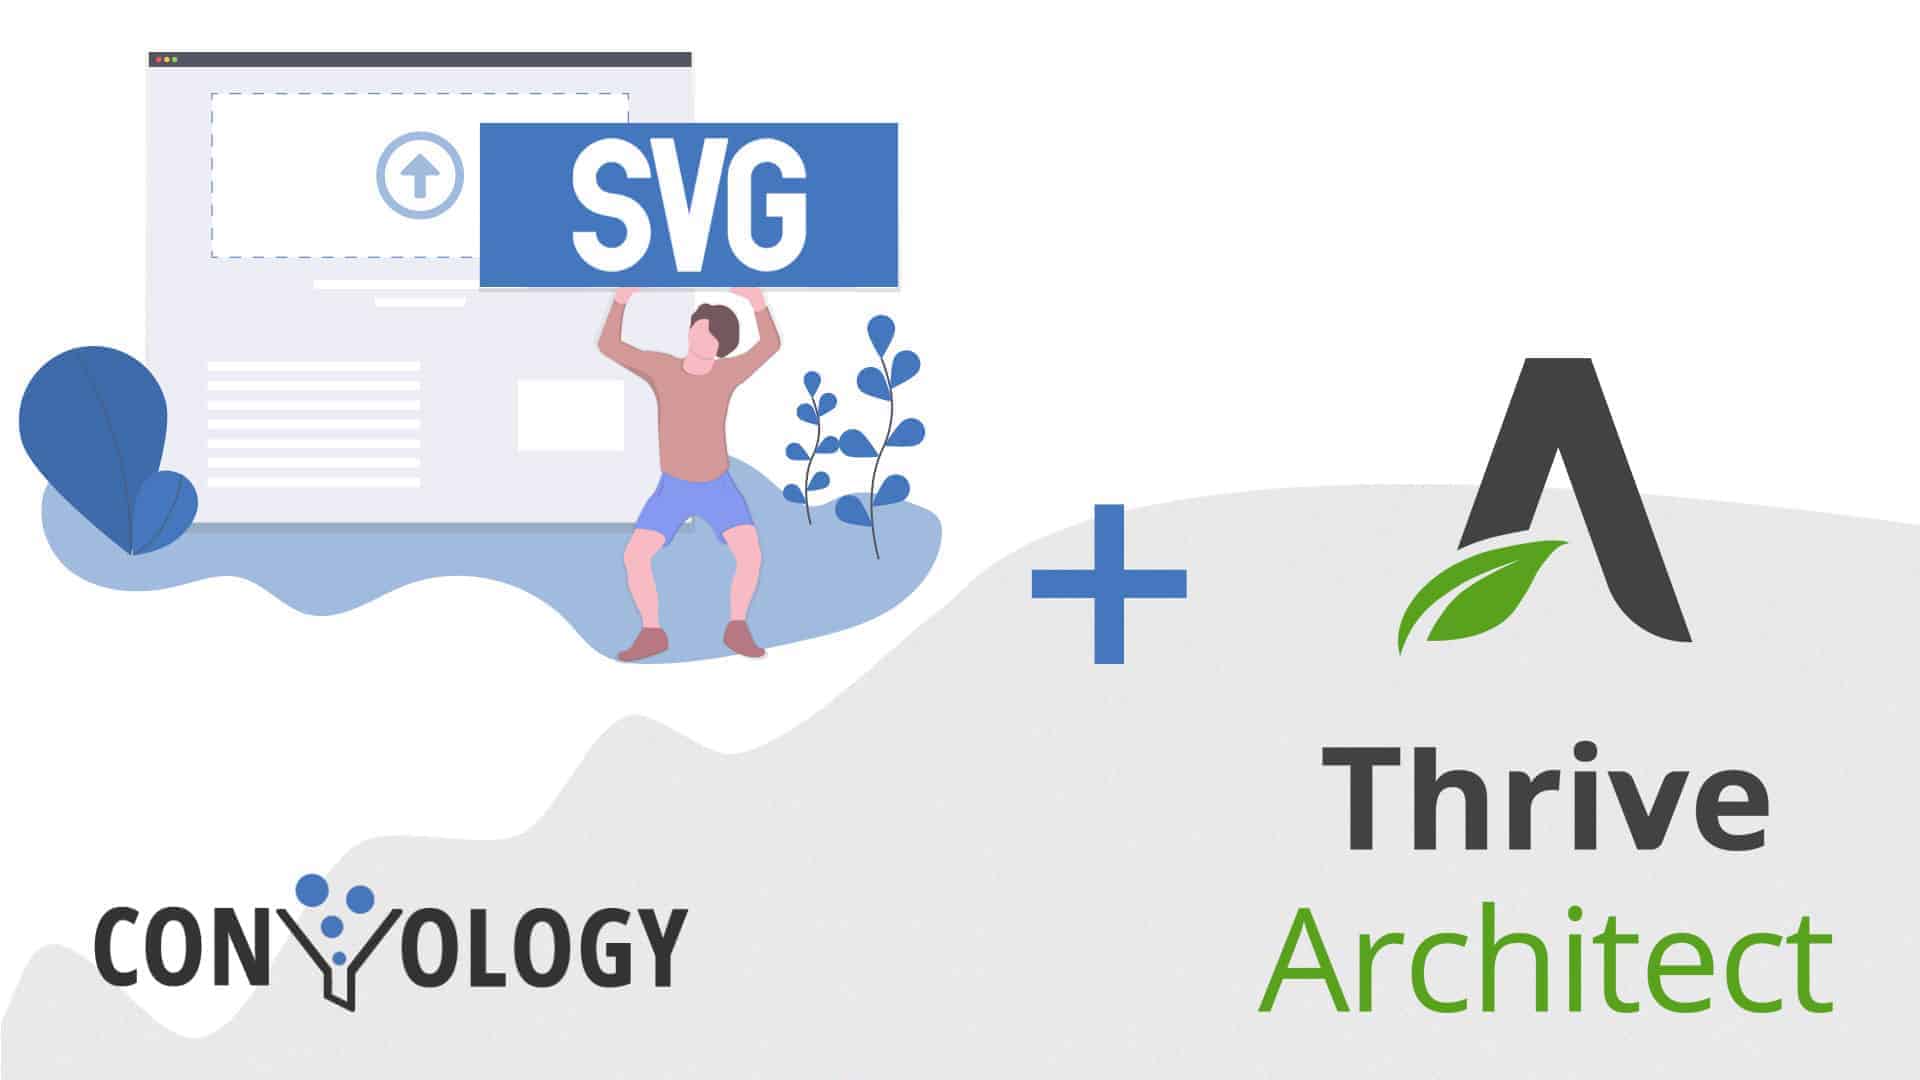 How to use SVG with Thrive Architect